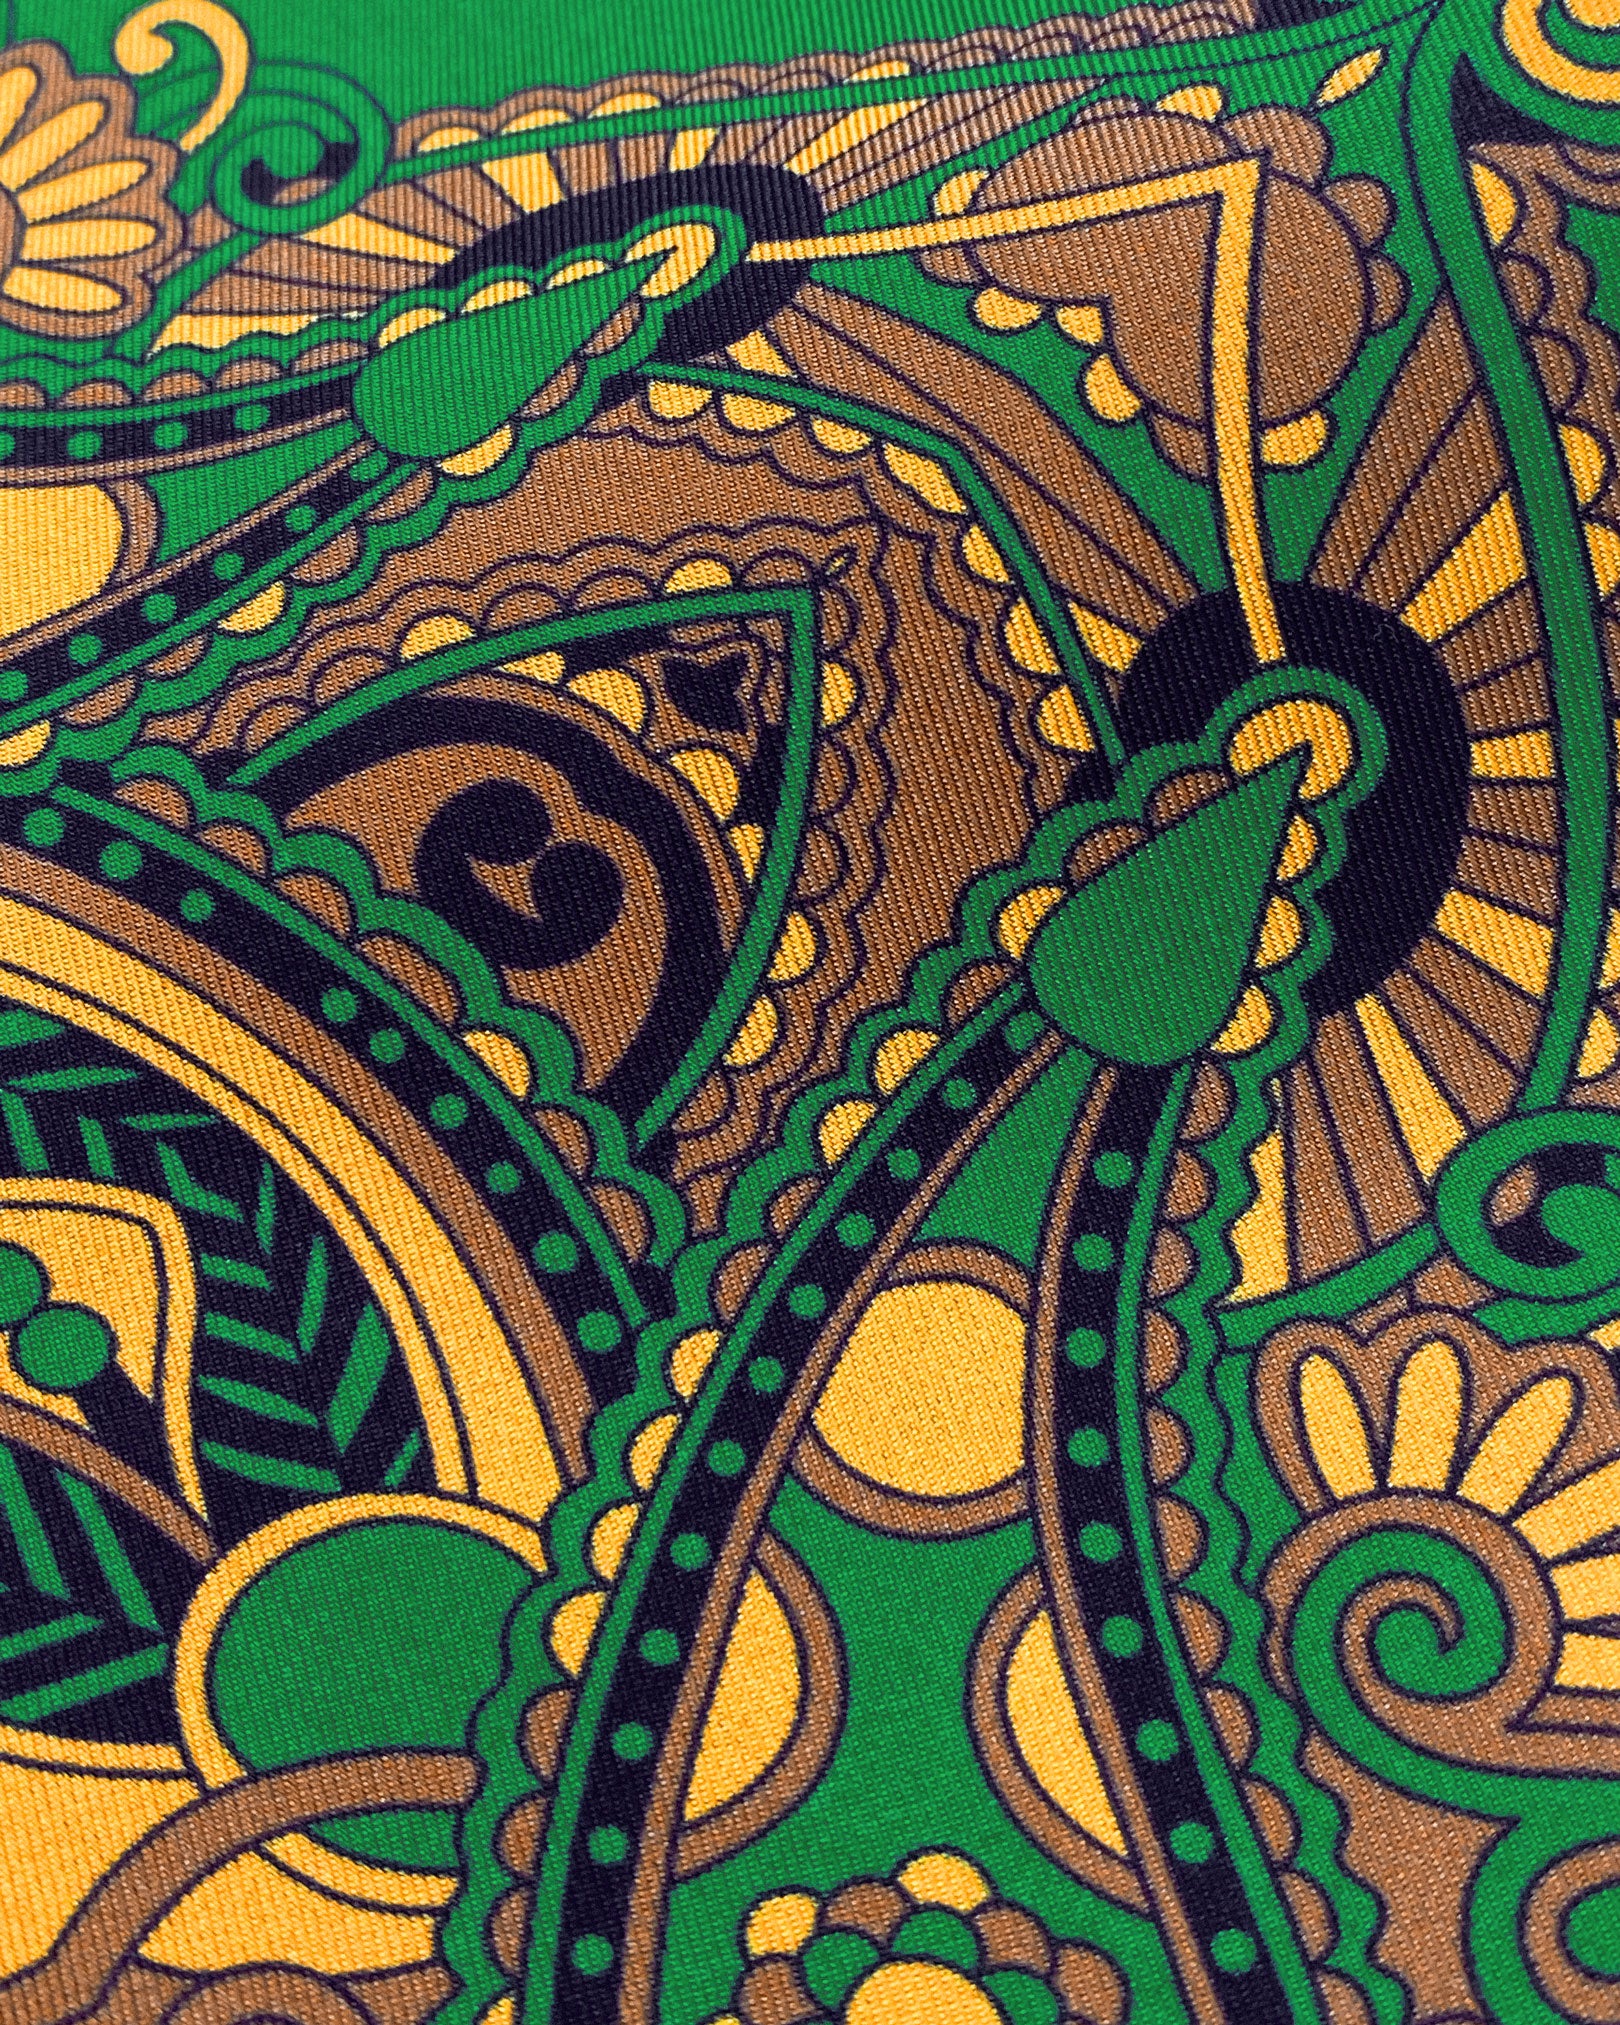 Close-up view of the Forks pocket square, presenting a closer view of the golden Fleur-de-Lis pattern on a emerald-green background and lustre of the silk material.